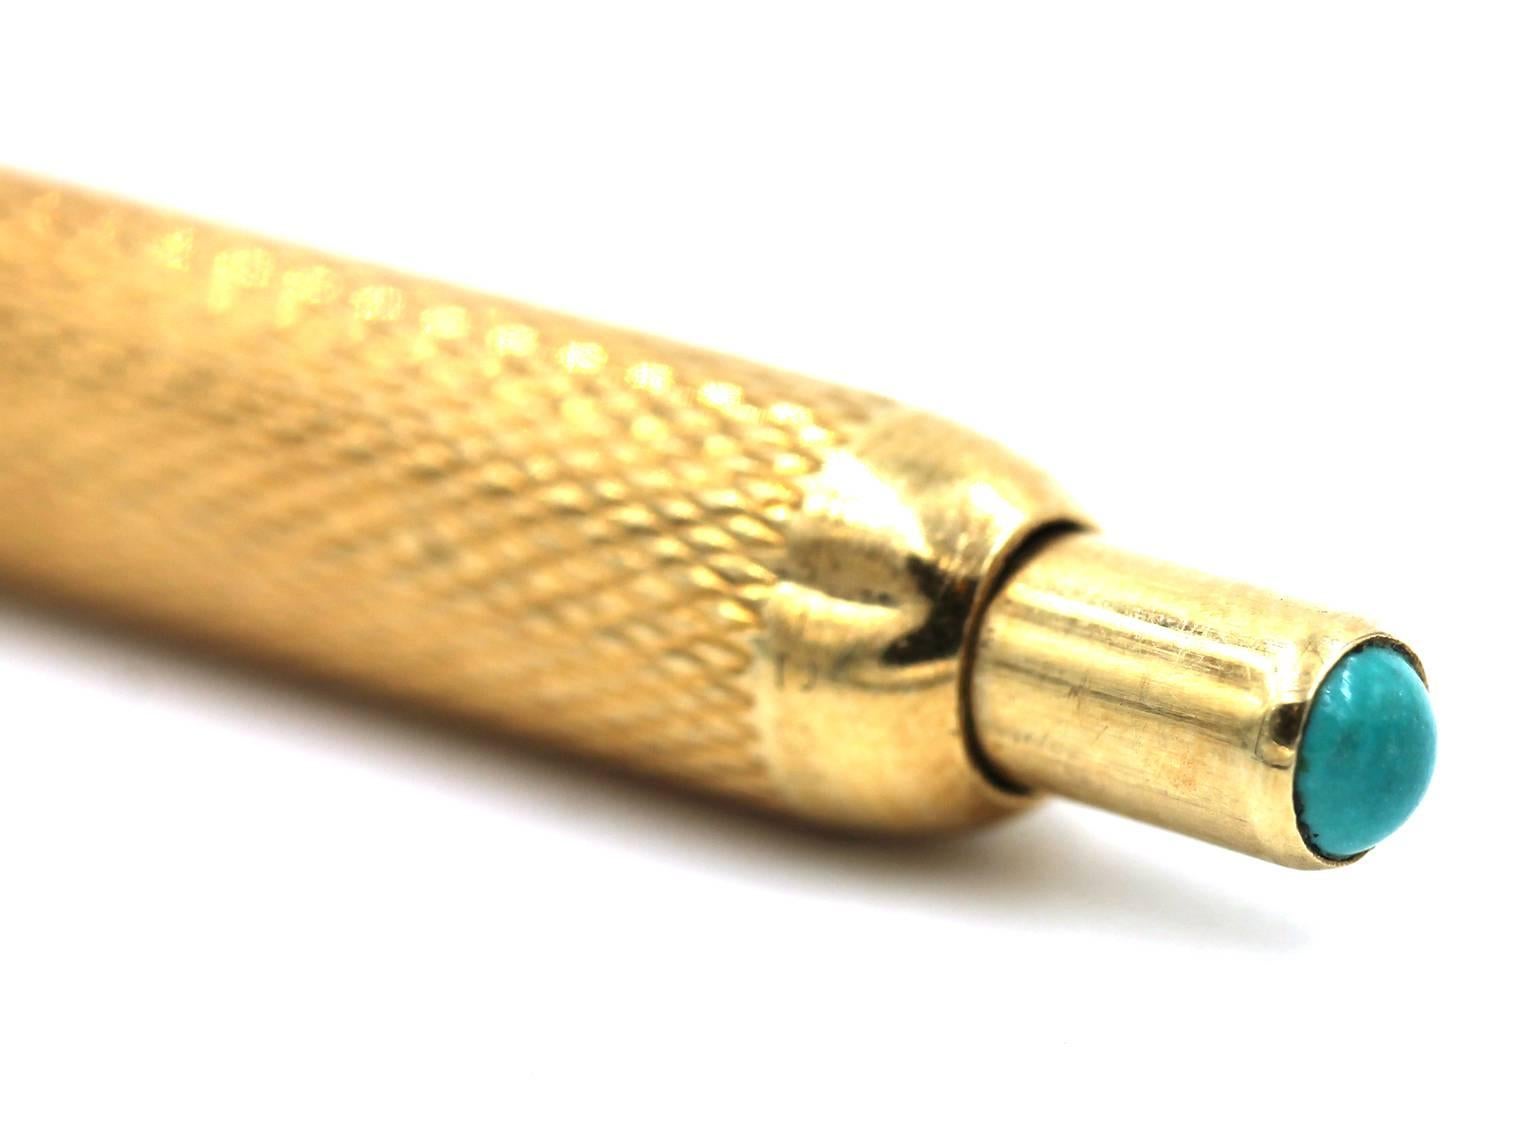  Van Cleef and Arpels 14 karat yellow gold ball point style pen with click open and closure. The pen has a textured finish and the spring has a round cabochon turquoise stone bezel set at the top. The pin is signed VC&A 14K, and is 4 inches in